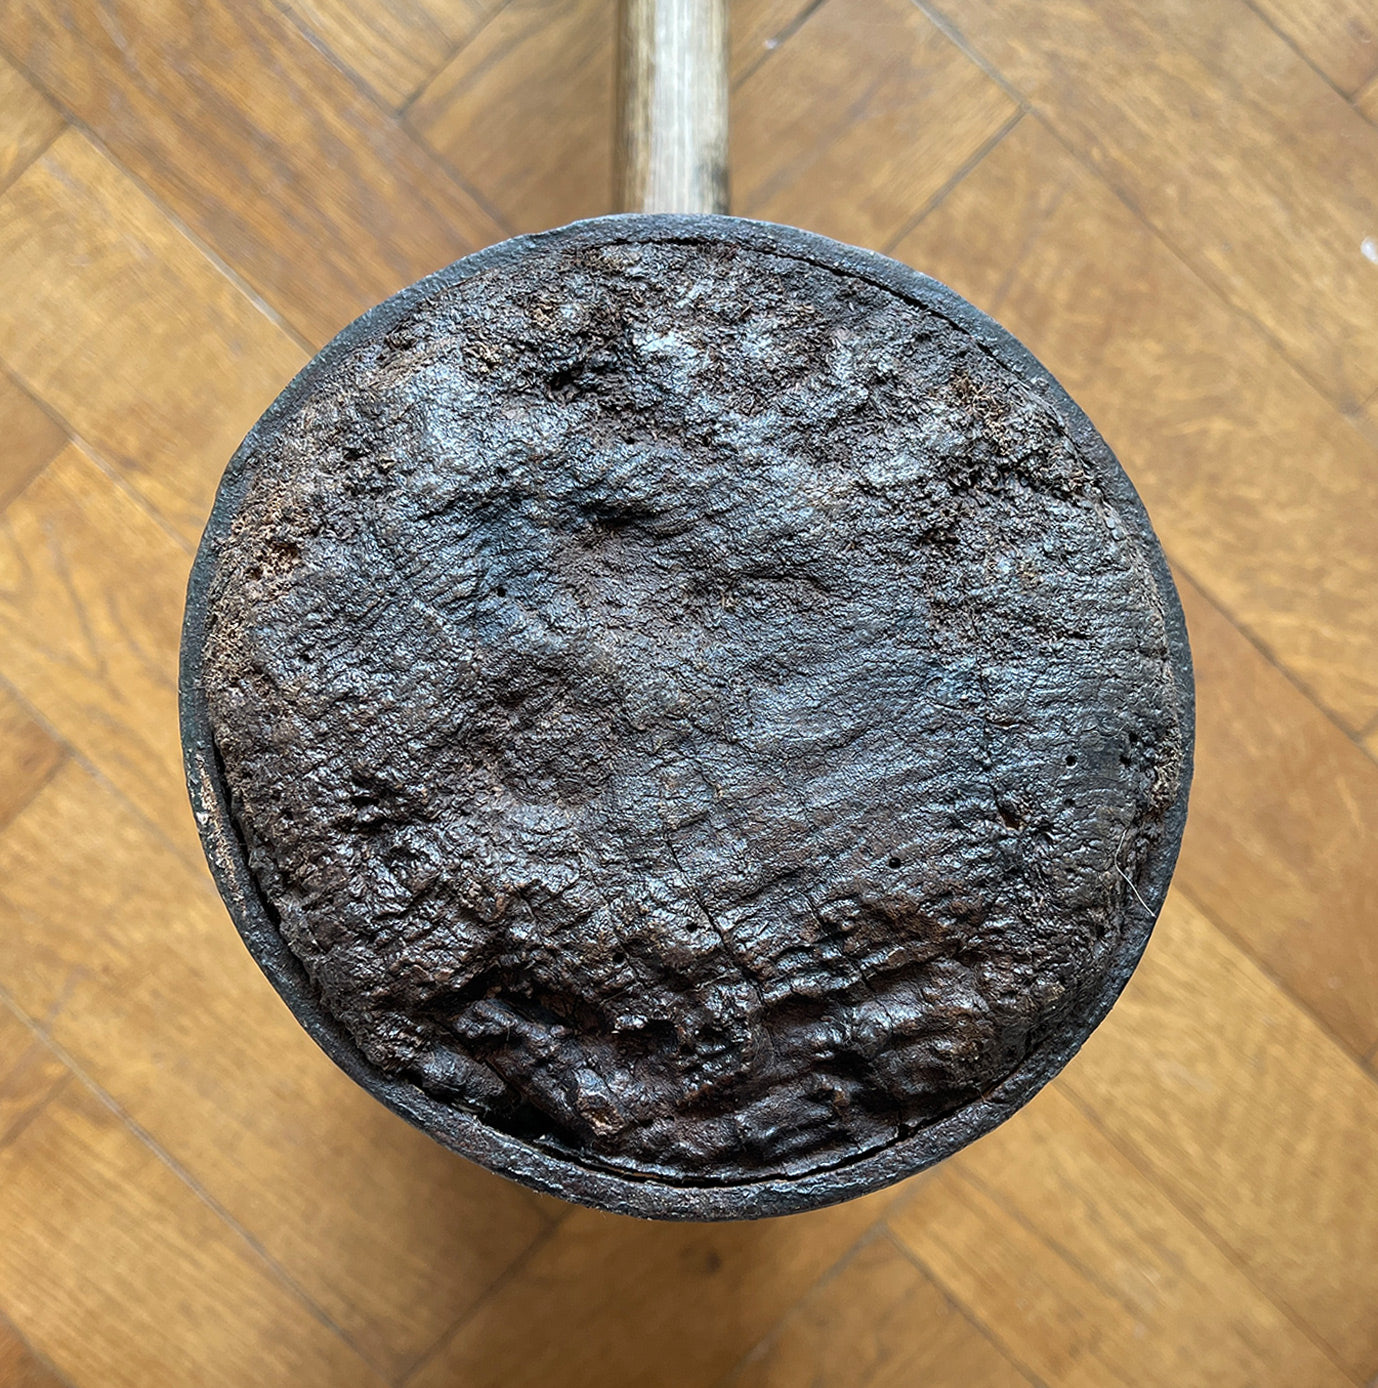 A Large Antique Circus/Fairground Hammer with remnants of its original red paint. It has two metal riveted straps at each end with a sturdy hickory handle - SHOP NOW - www.itovintage.co.uk